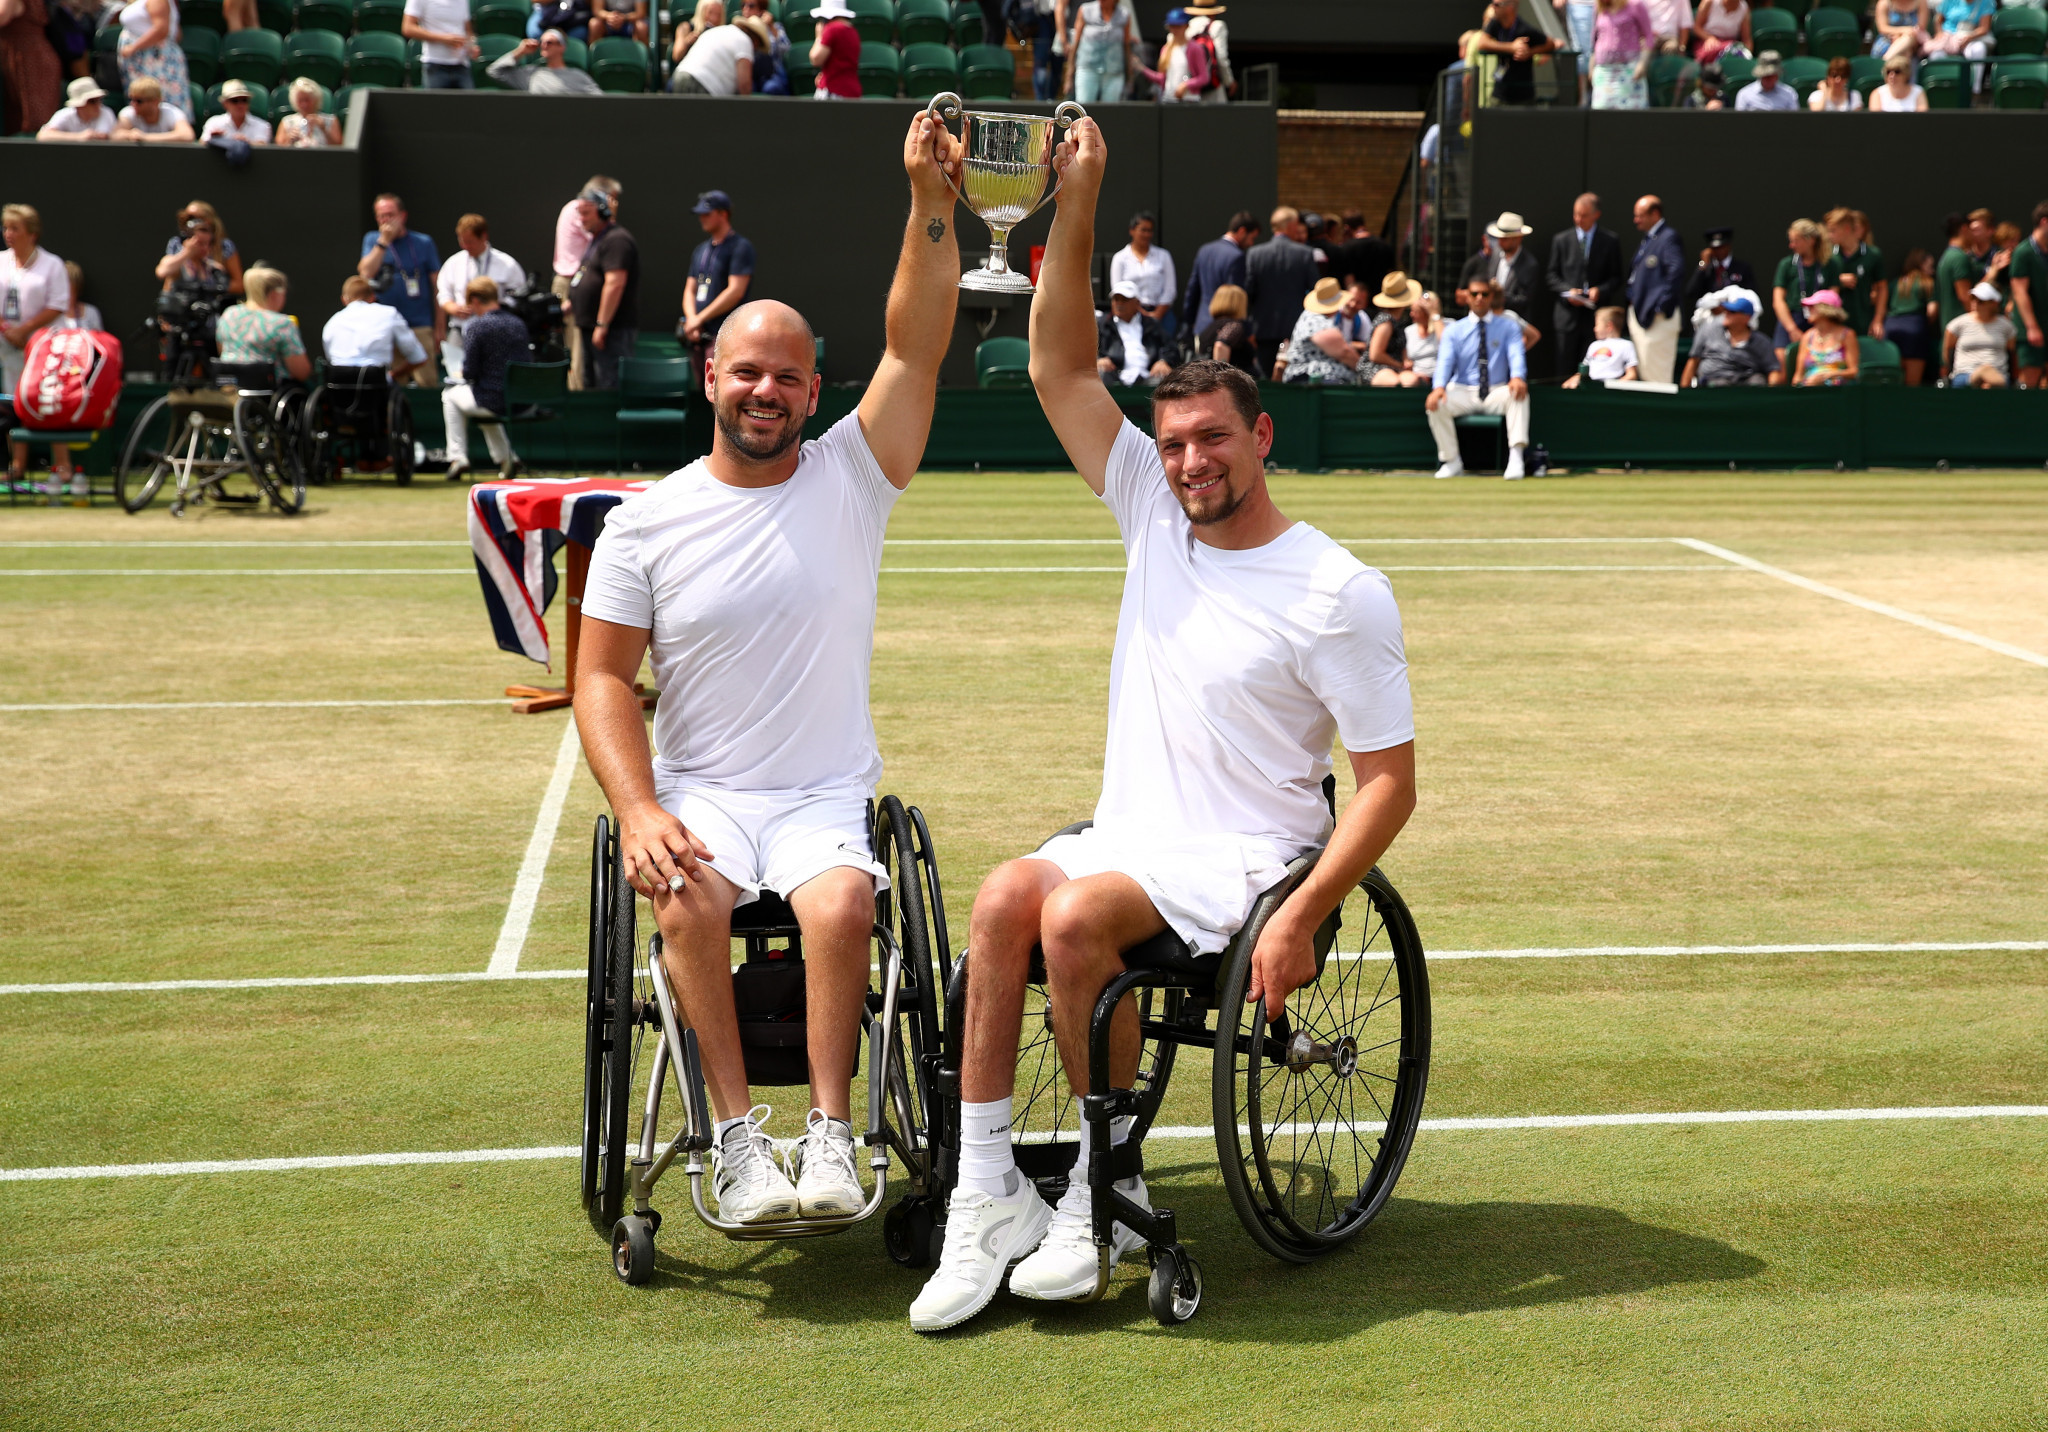 Joachim Gerard of Belgium and Sweden's Stefan Olsson celebrate victory in the men's wheelchair tennis doubles final at Wimbledon ©Getty Images